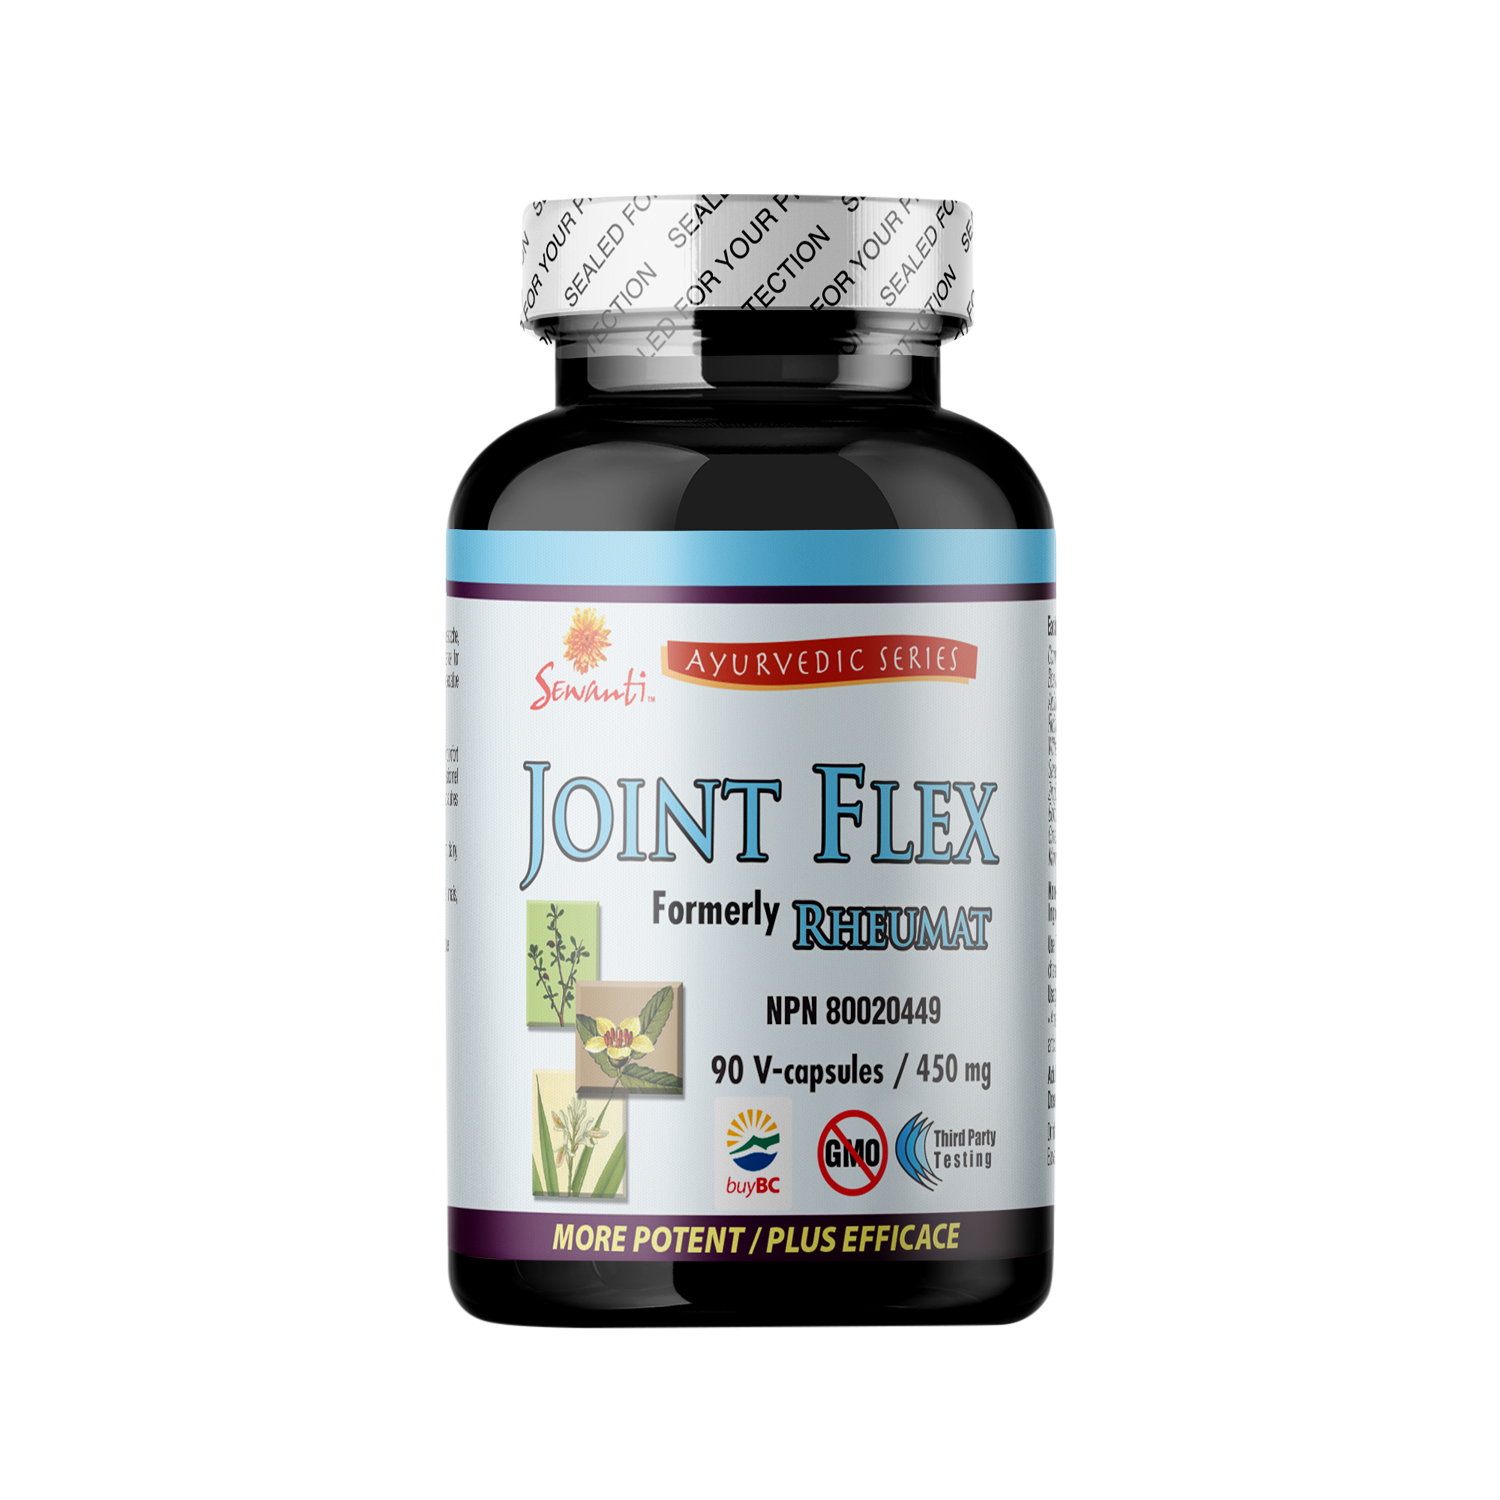 Ayurvedic Joint Flex Capsules - Joint disorders affect about 80% of the older individuals in North America however the symptoms are worse in the colder weather. The causative factors of joint pains may be due to obesity, improper use of joints, overuse of the joints, sports injury, stress, or diet. The most commonly affected joints are knees, ankles, elbows, wrists, fingers, and toes.